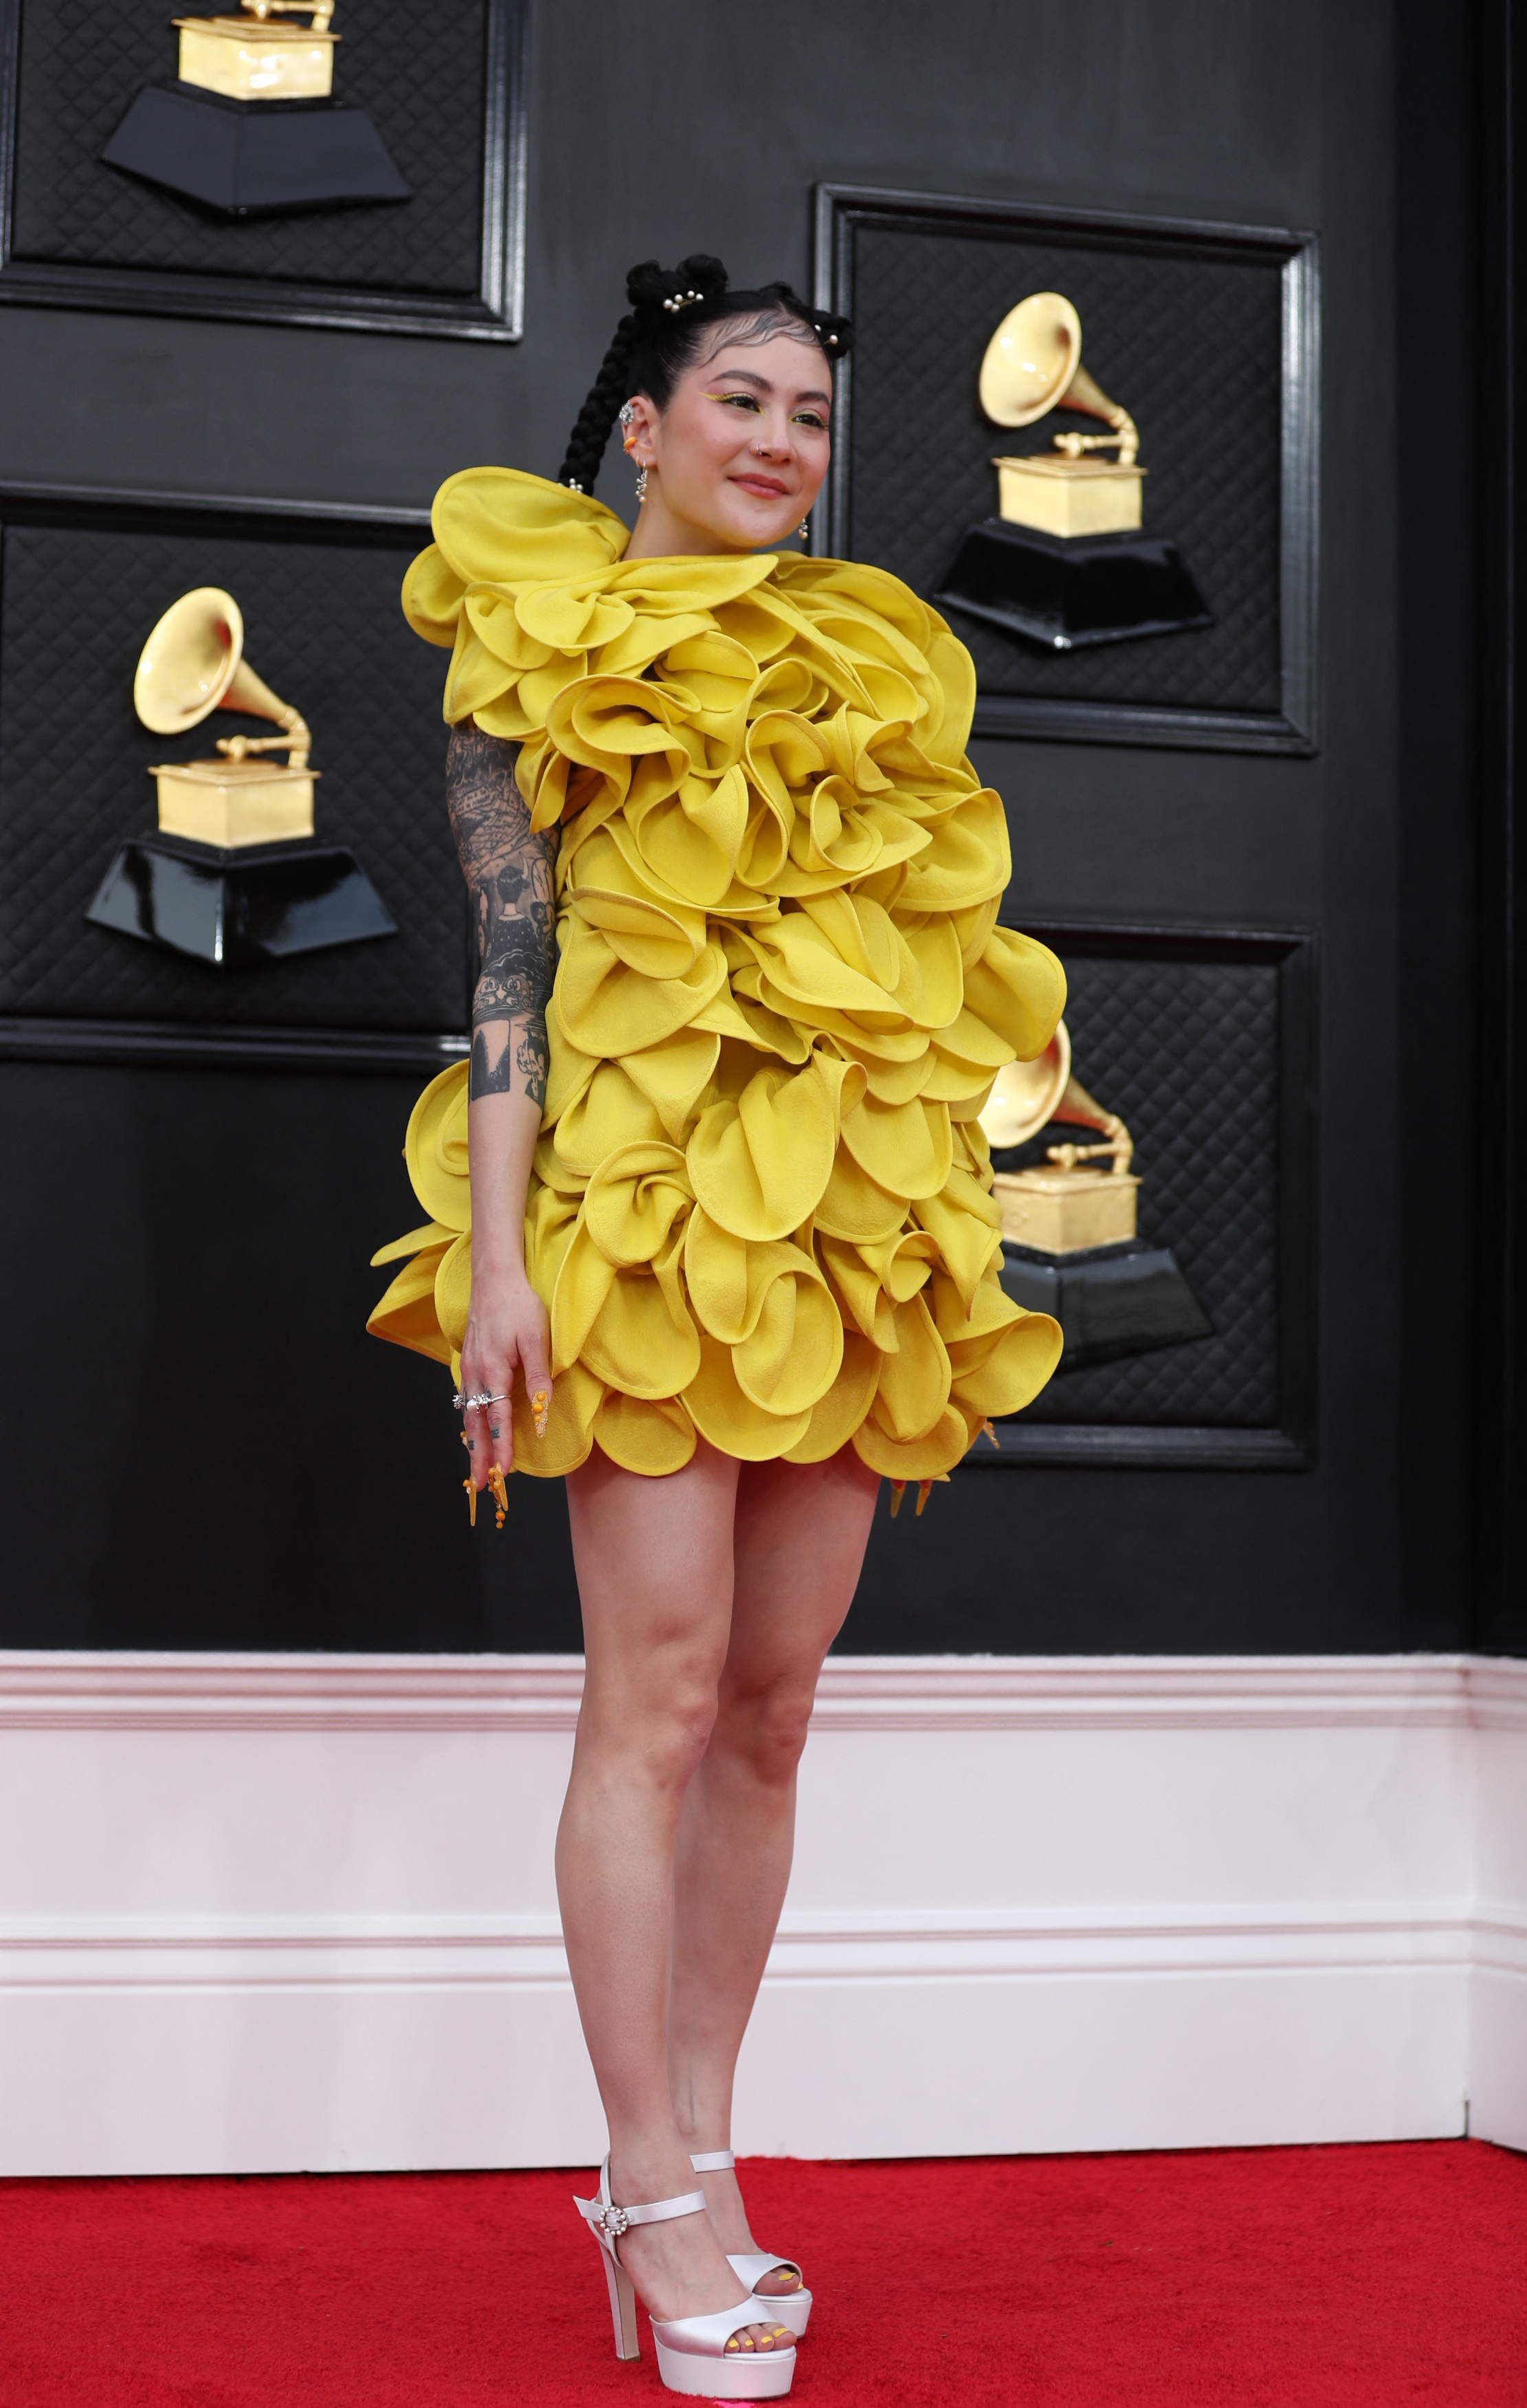 artist japanese breakfast poses on the red carpet wearing a bright yellow short dress with ruffled fabric like petals